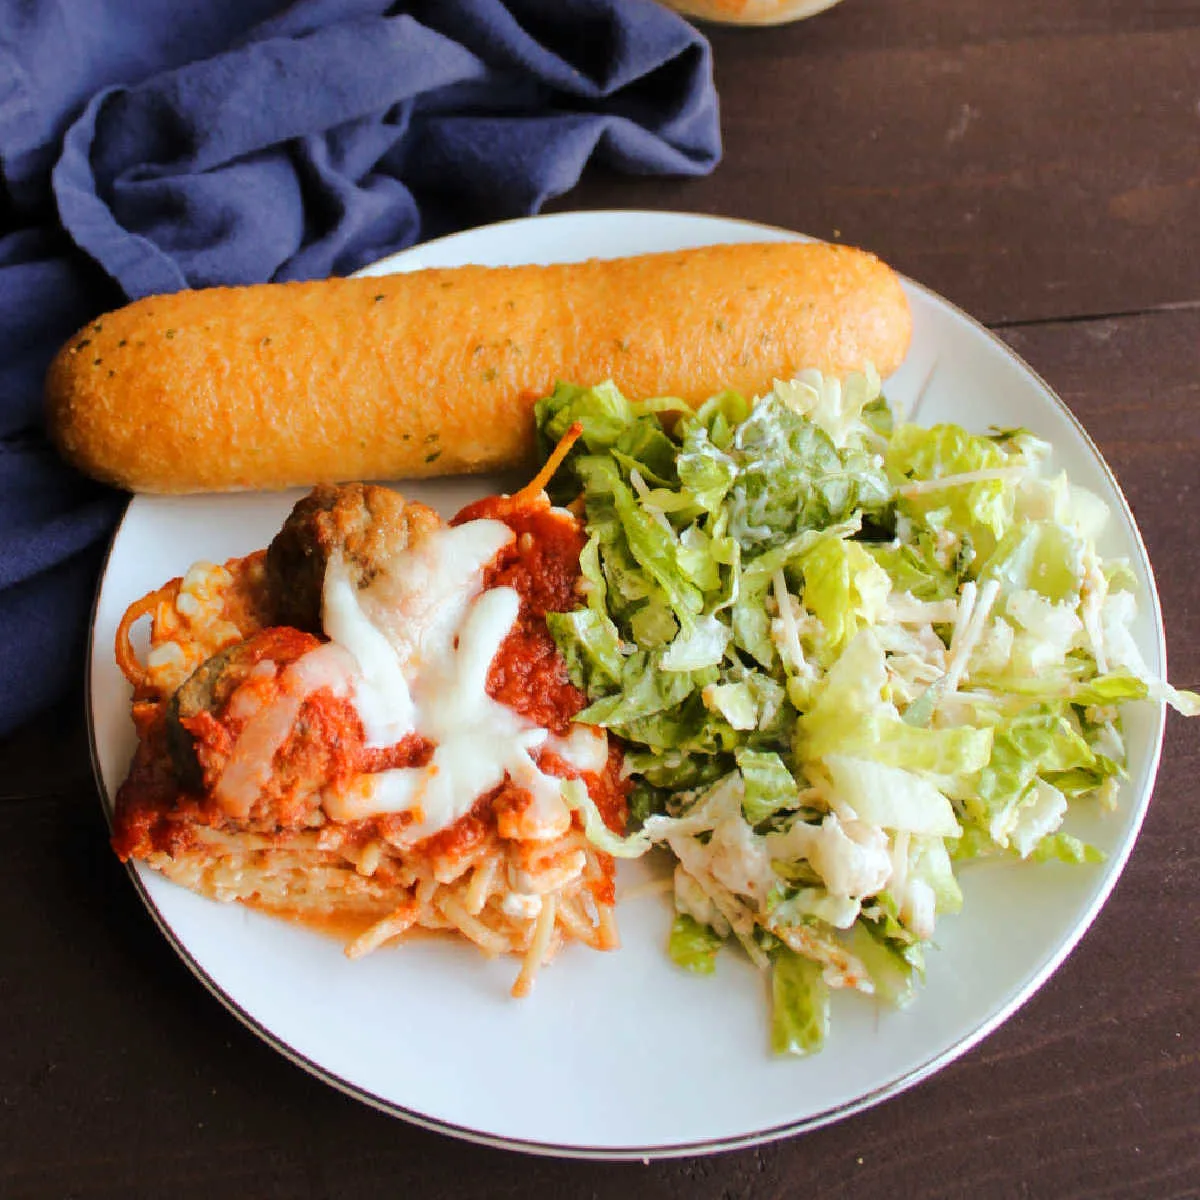 dinner plate filled with Caesar salad, breadstick and spaghetti and meatball bake.